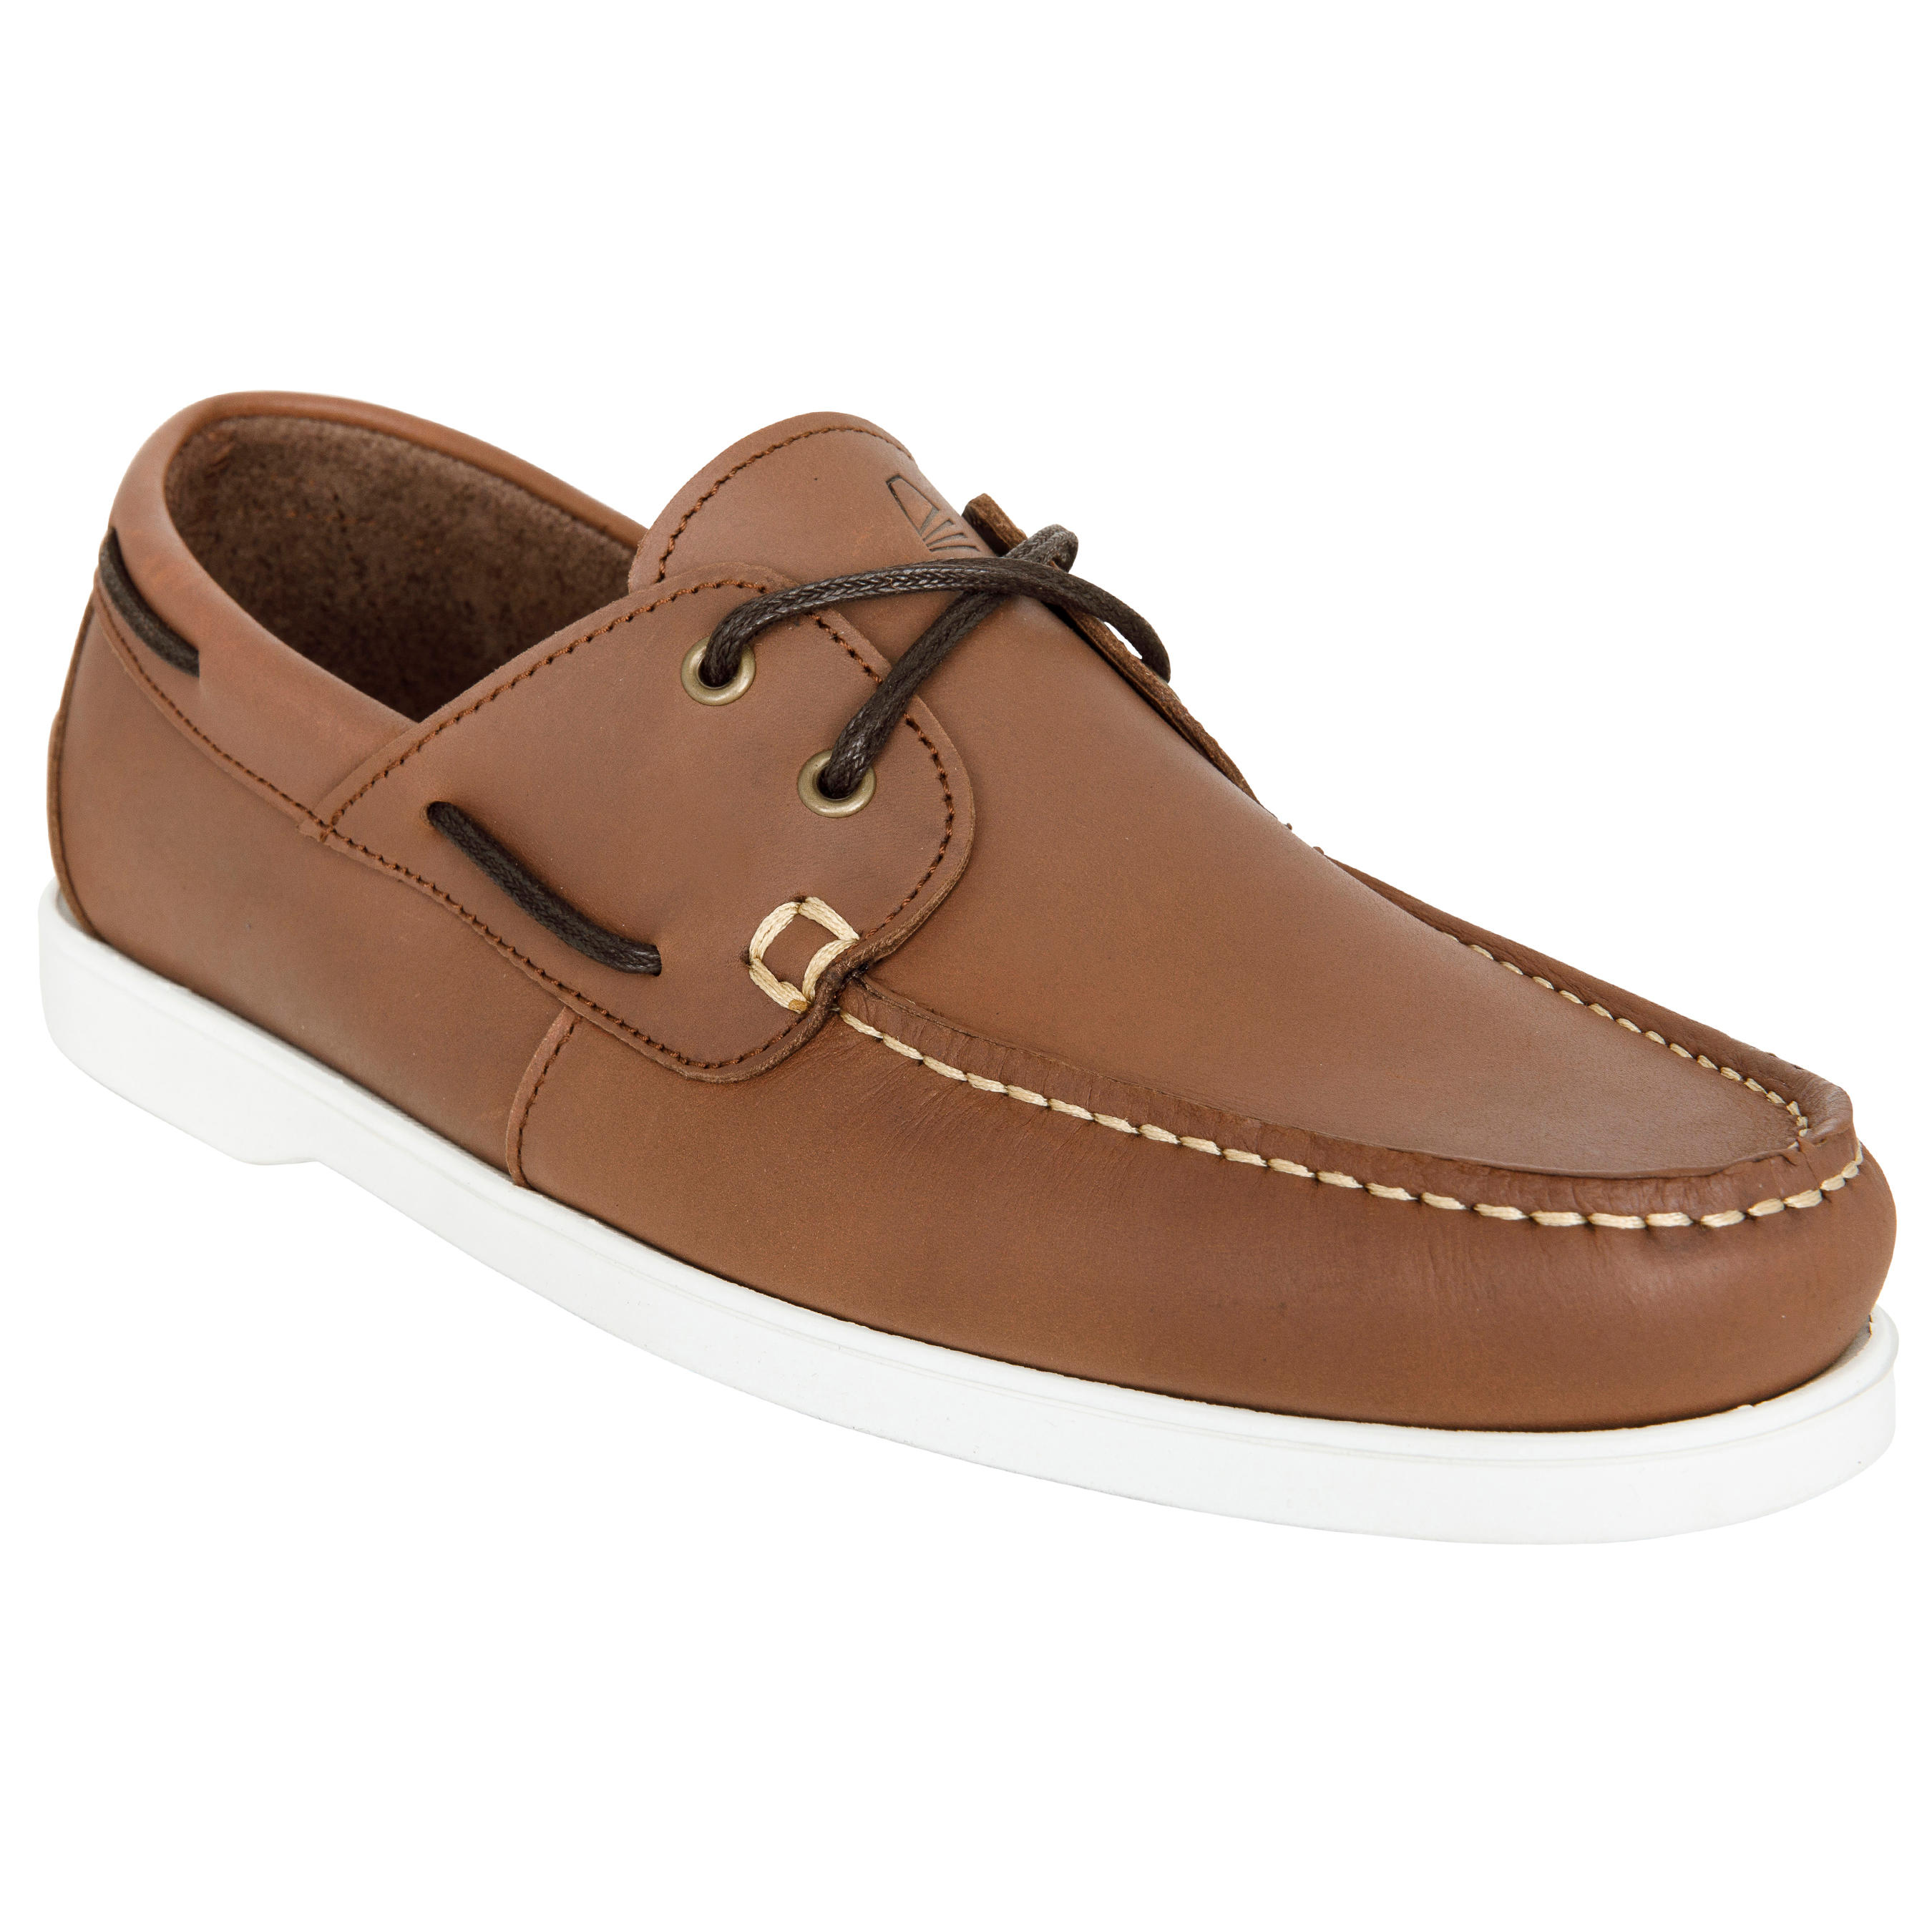 white sole boat shoes